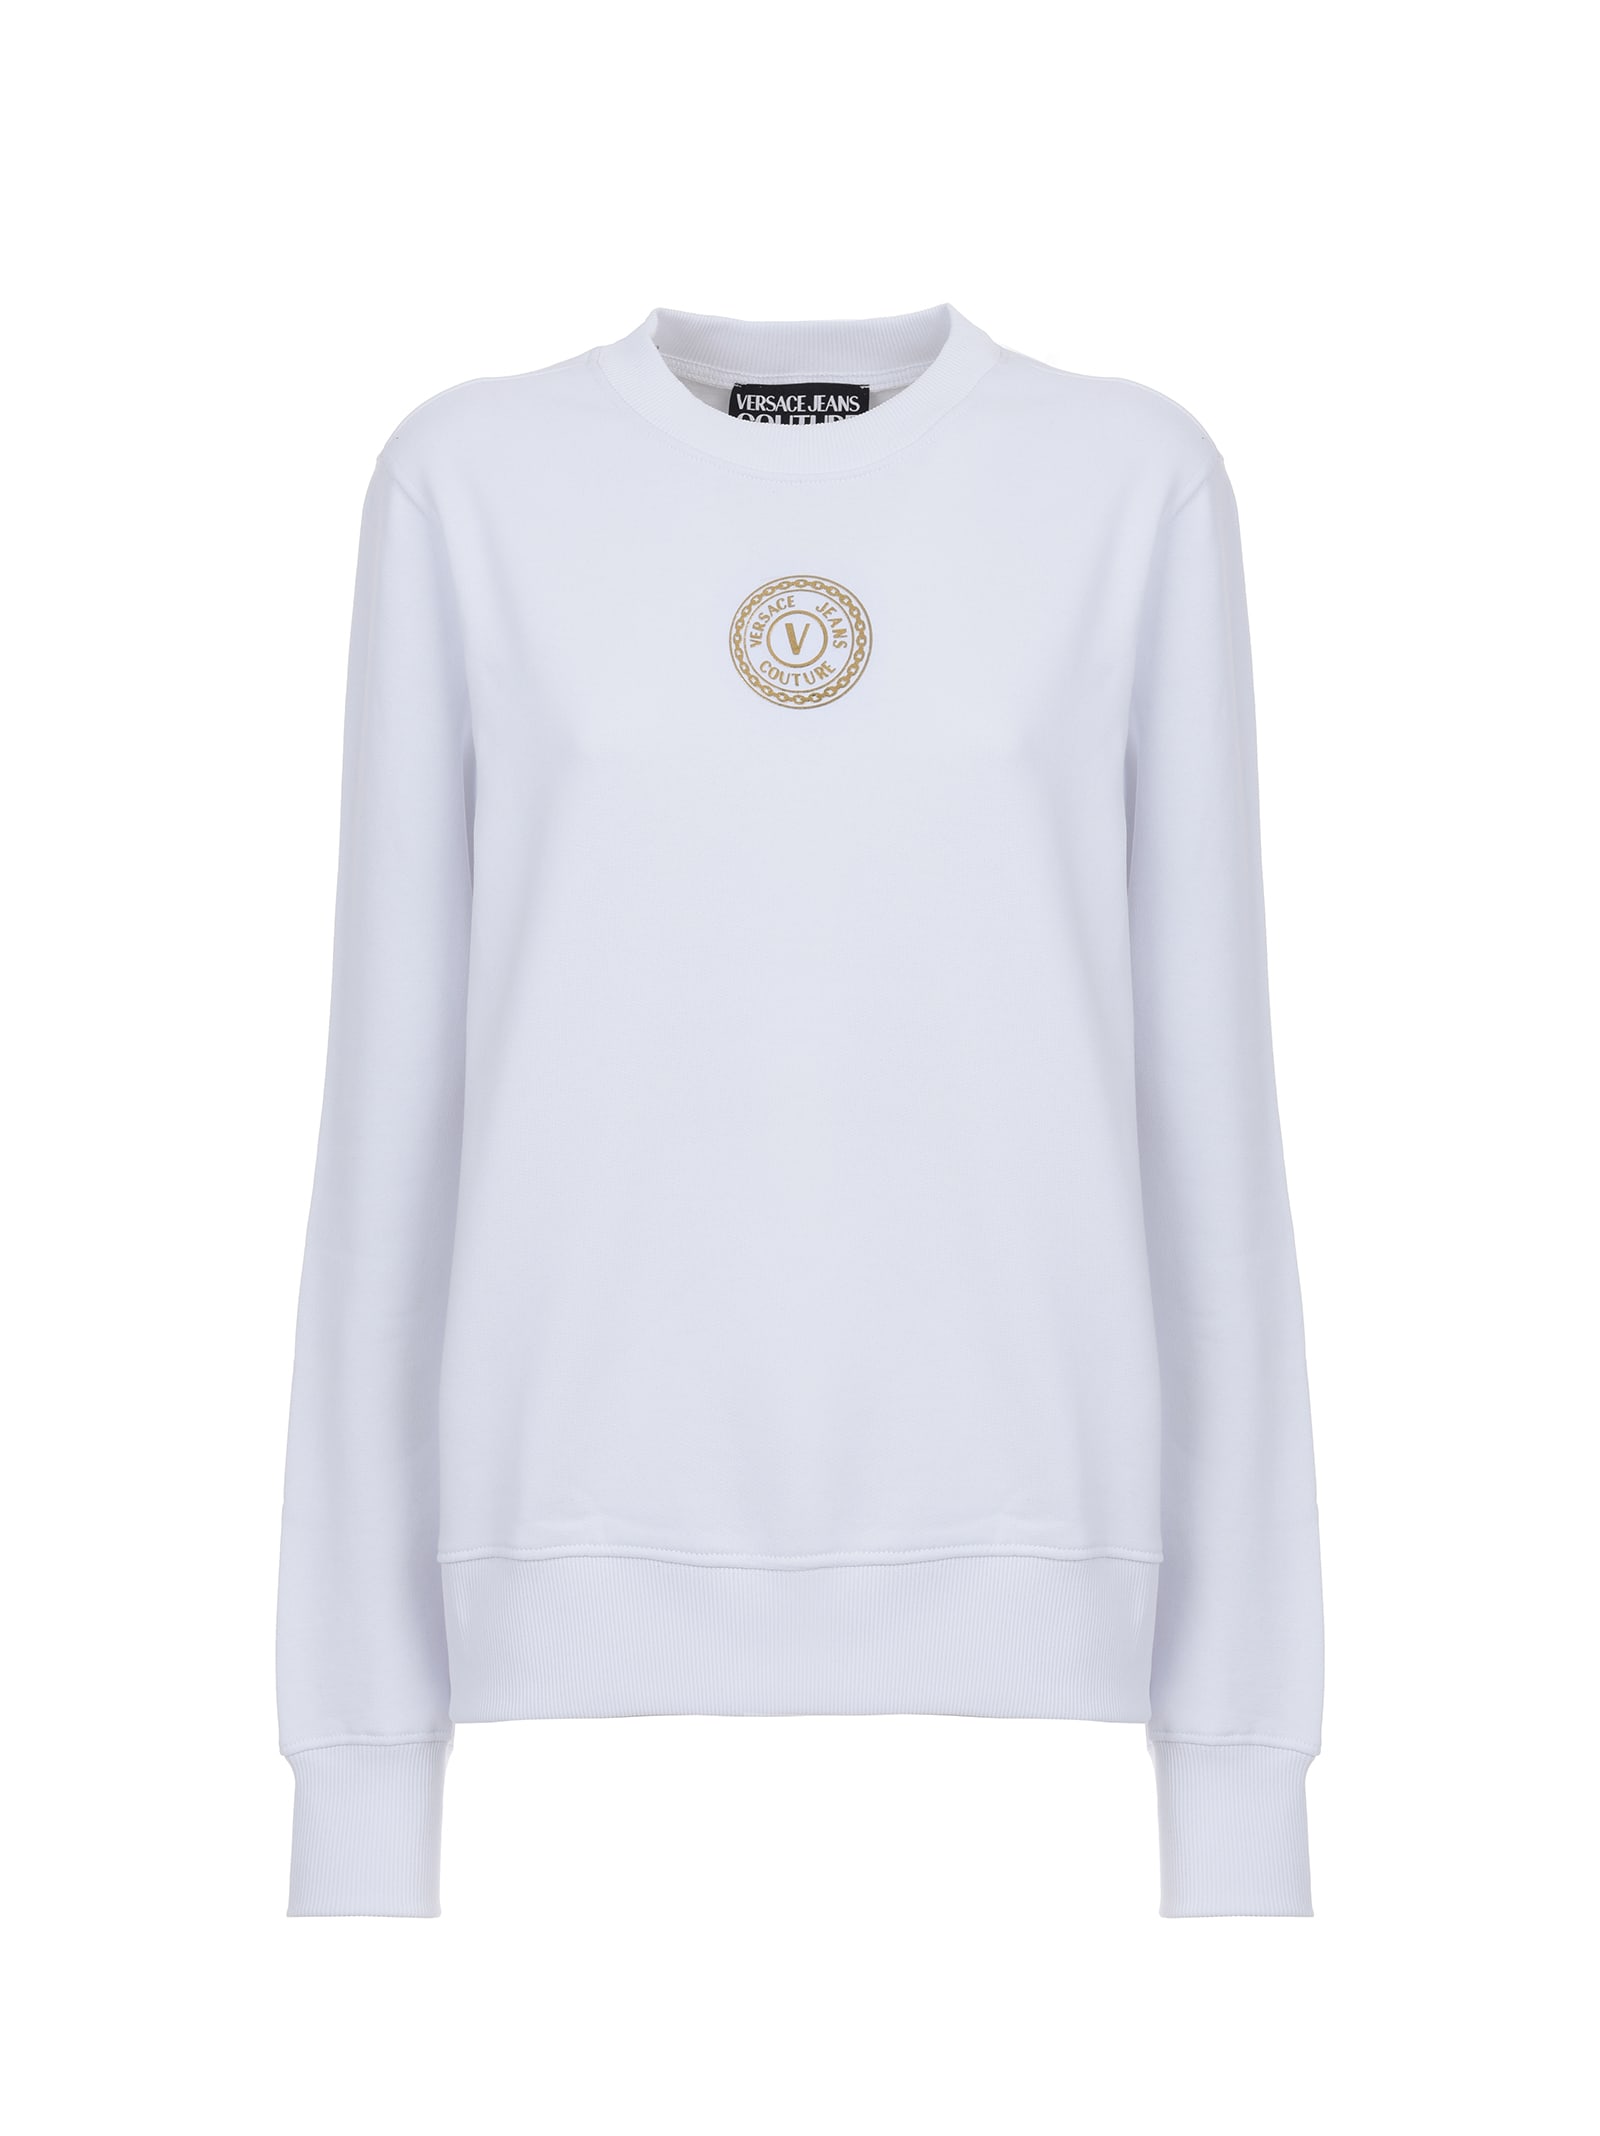 Versace Jeans Couture White Sweatshirt With Small V-emblem Gold Logo